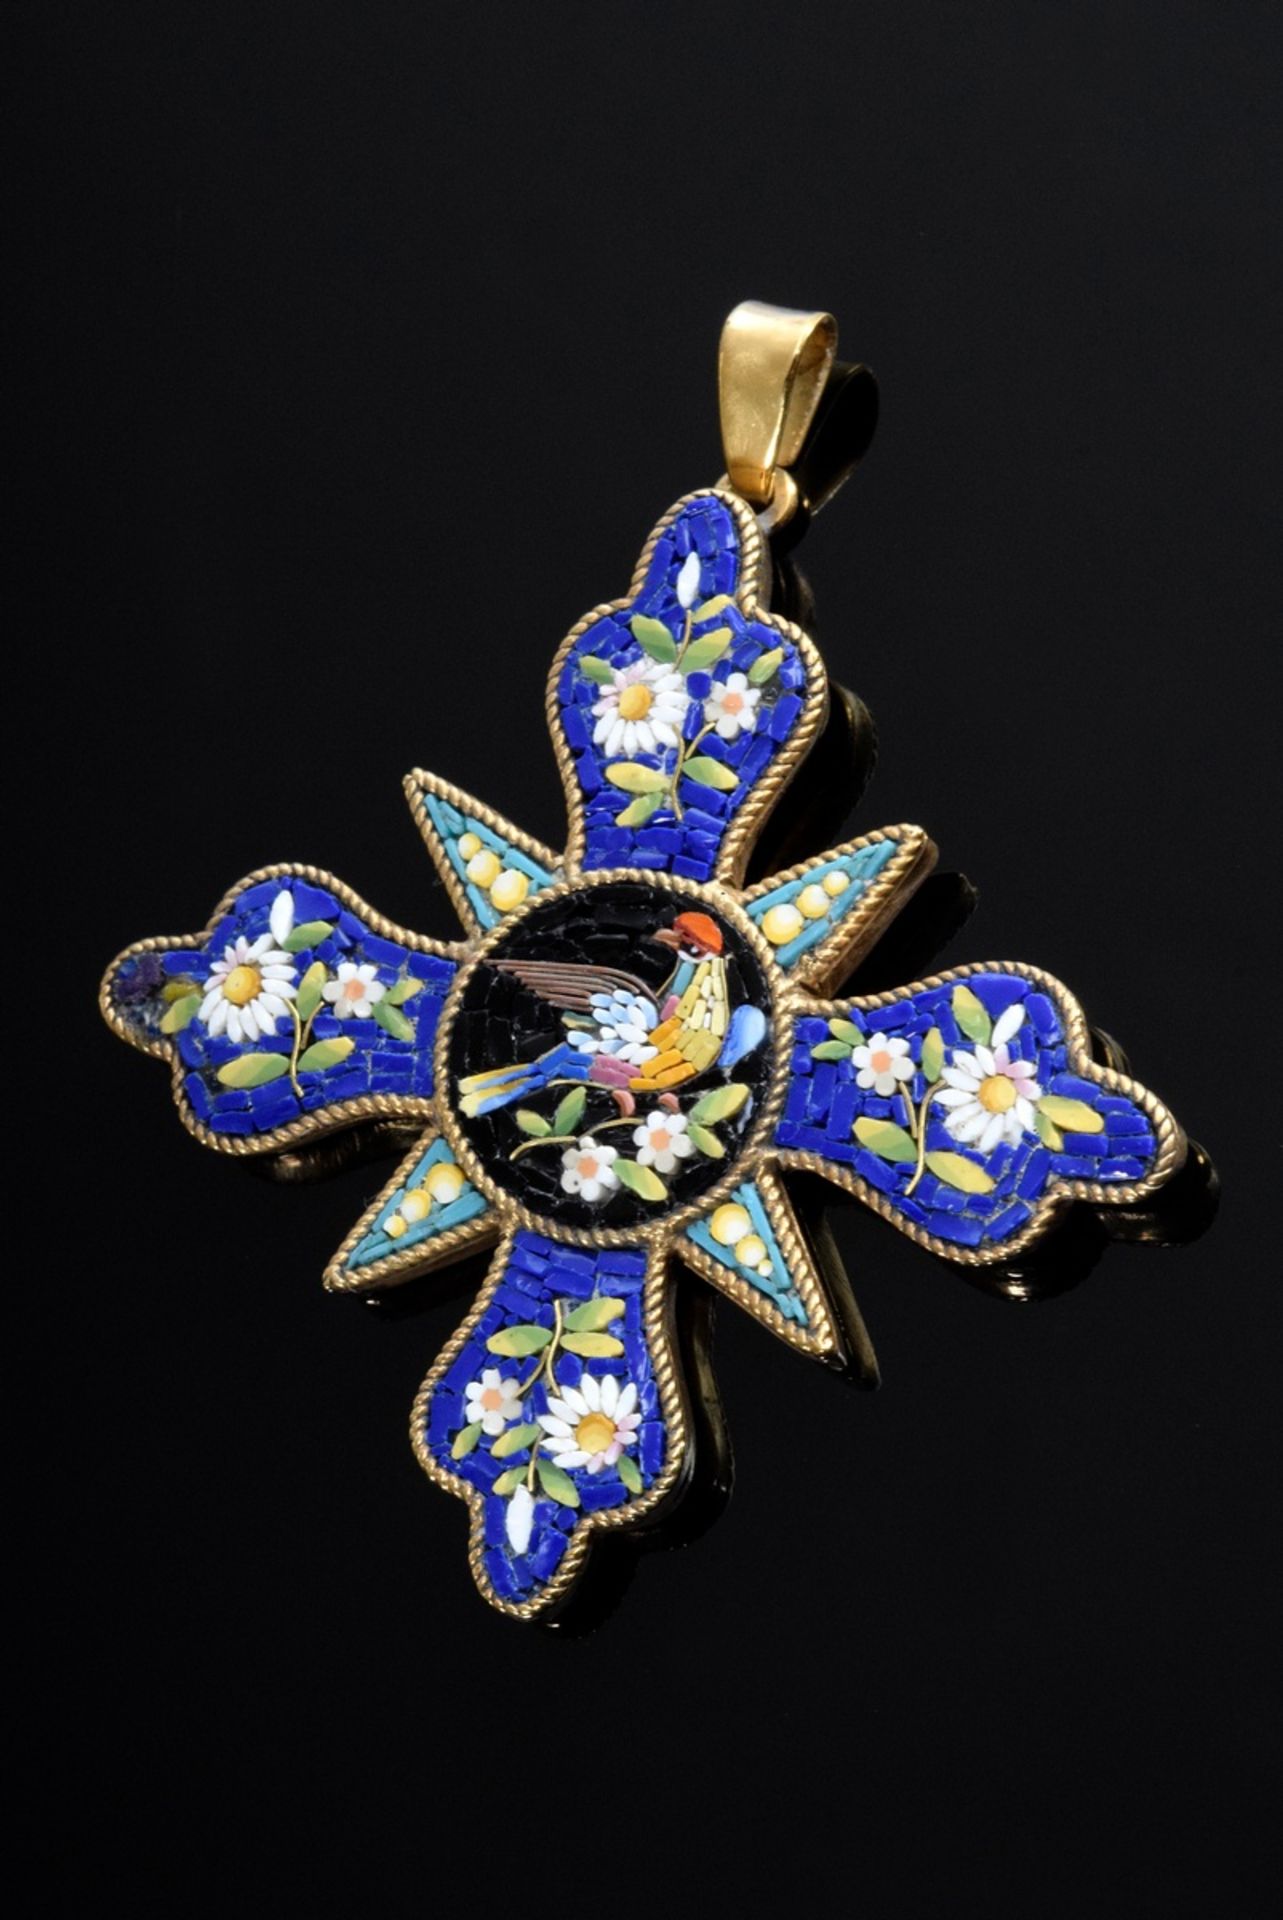 Souvenir pendant with micromosaic in brass setting, Italy circa 1880, 10g, 4.7x4.7cm, somewhat defe